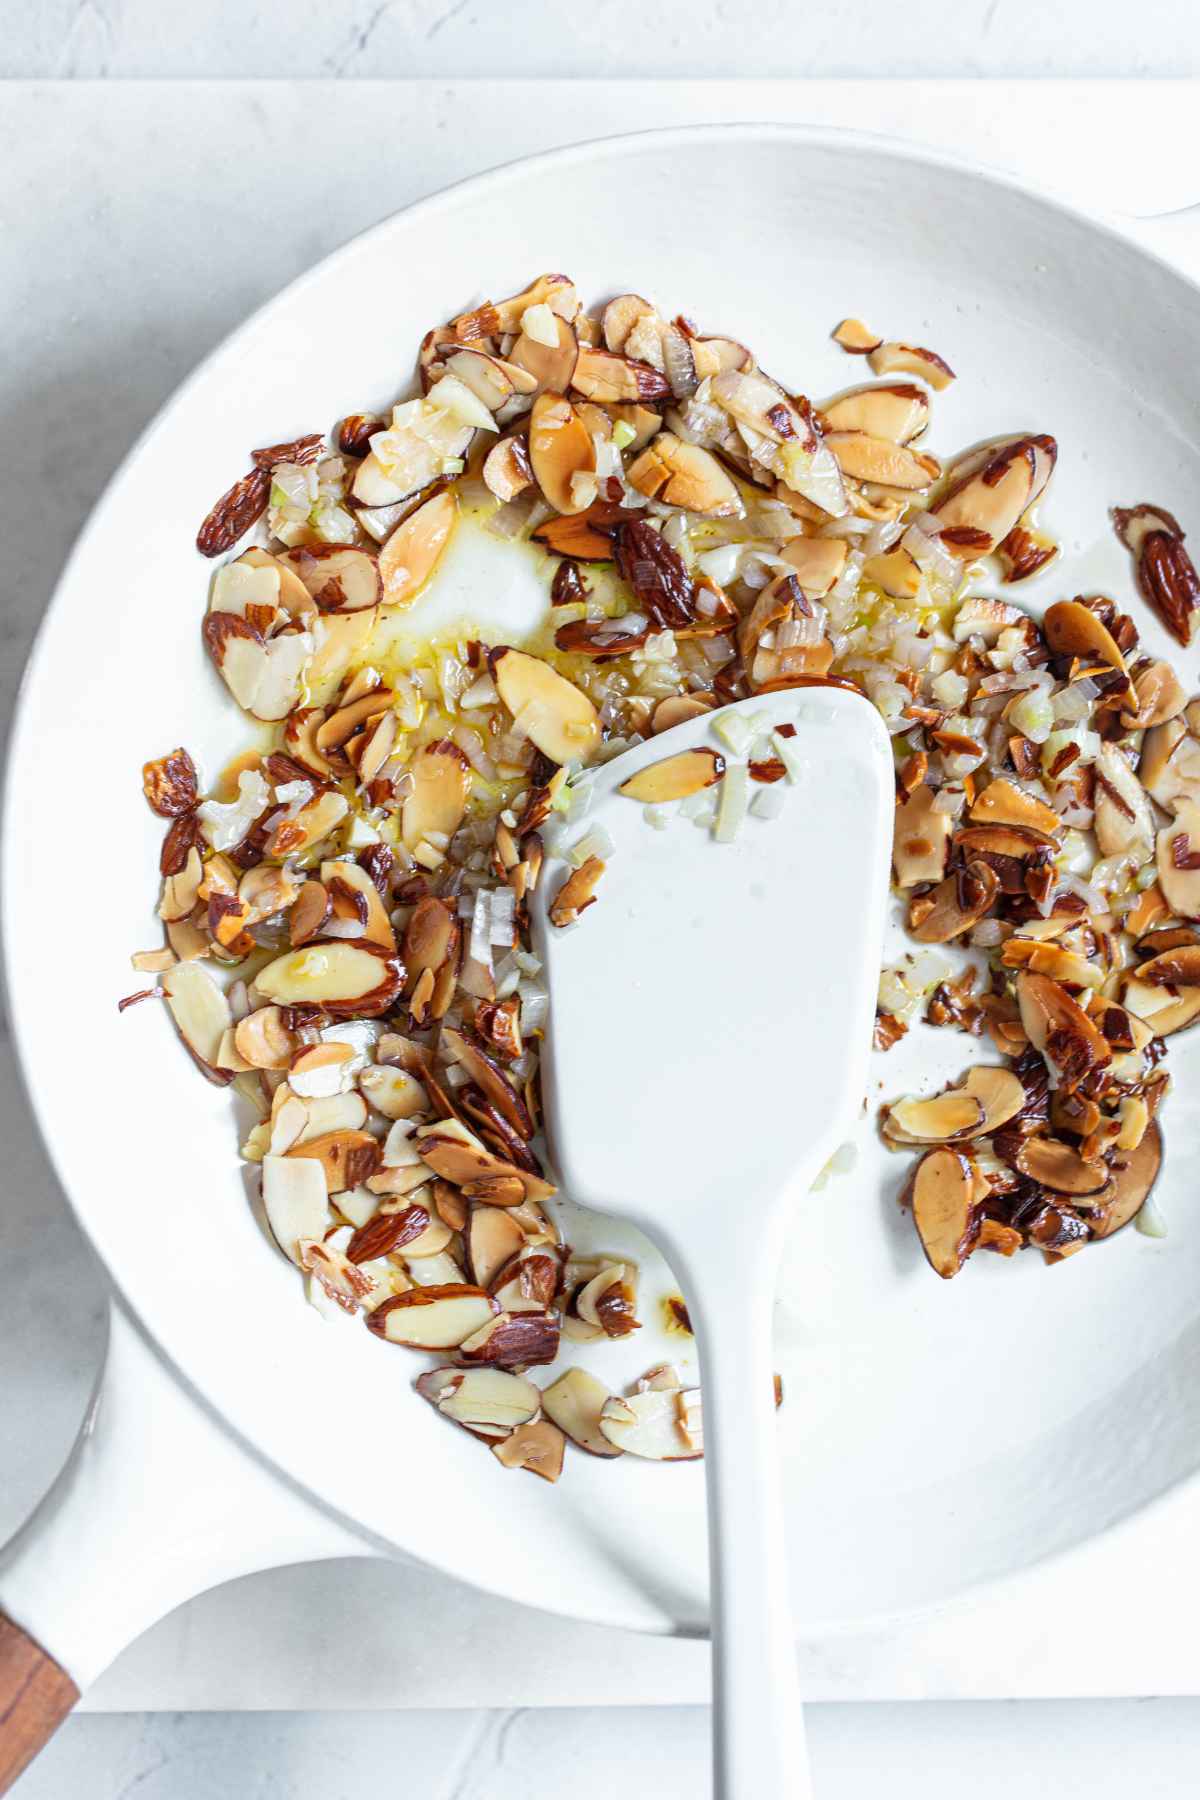 Toasting sliced almonds with a minced shallot and a minced garlic clove in a white skillet.